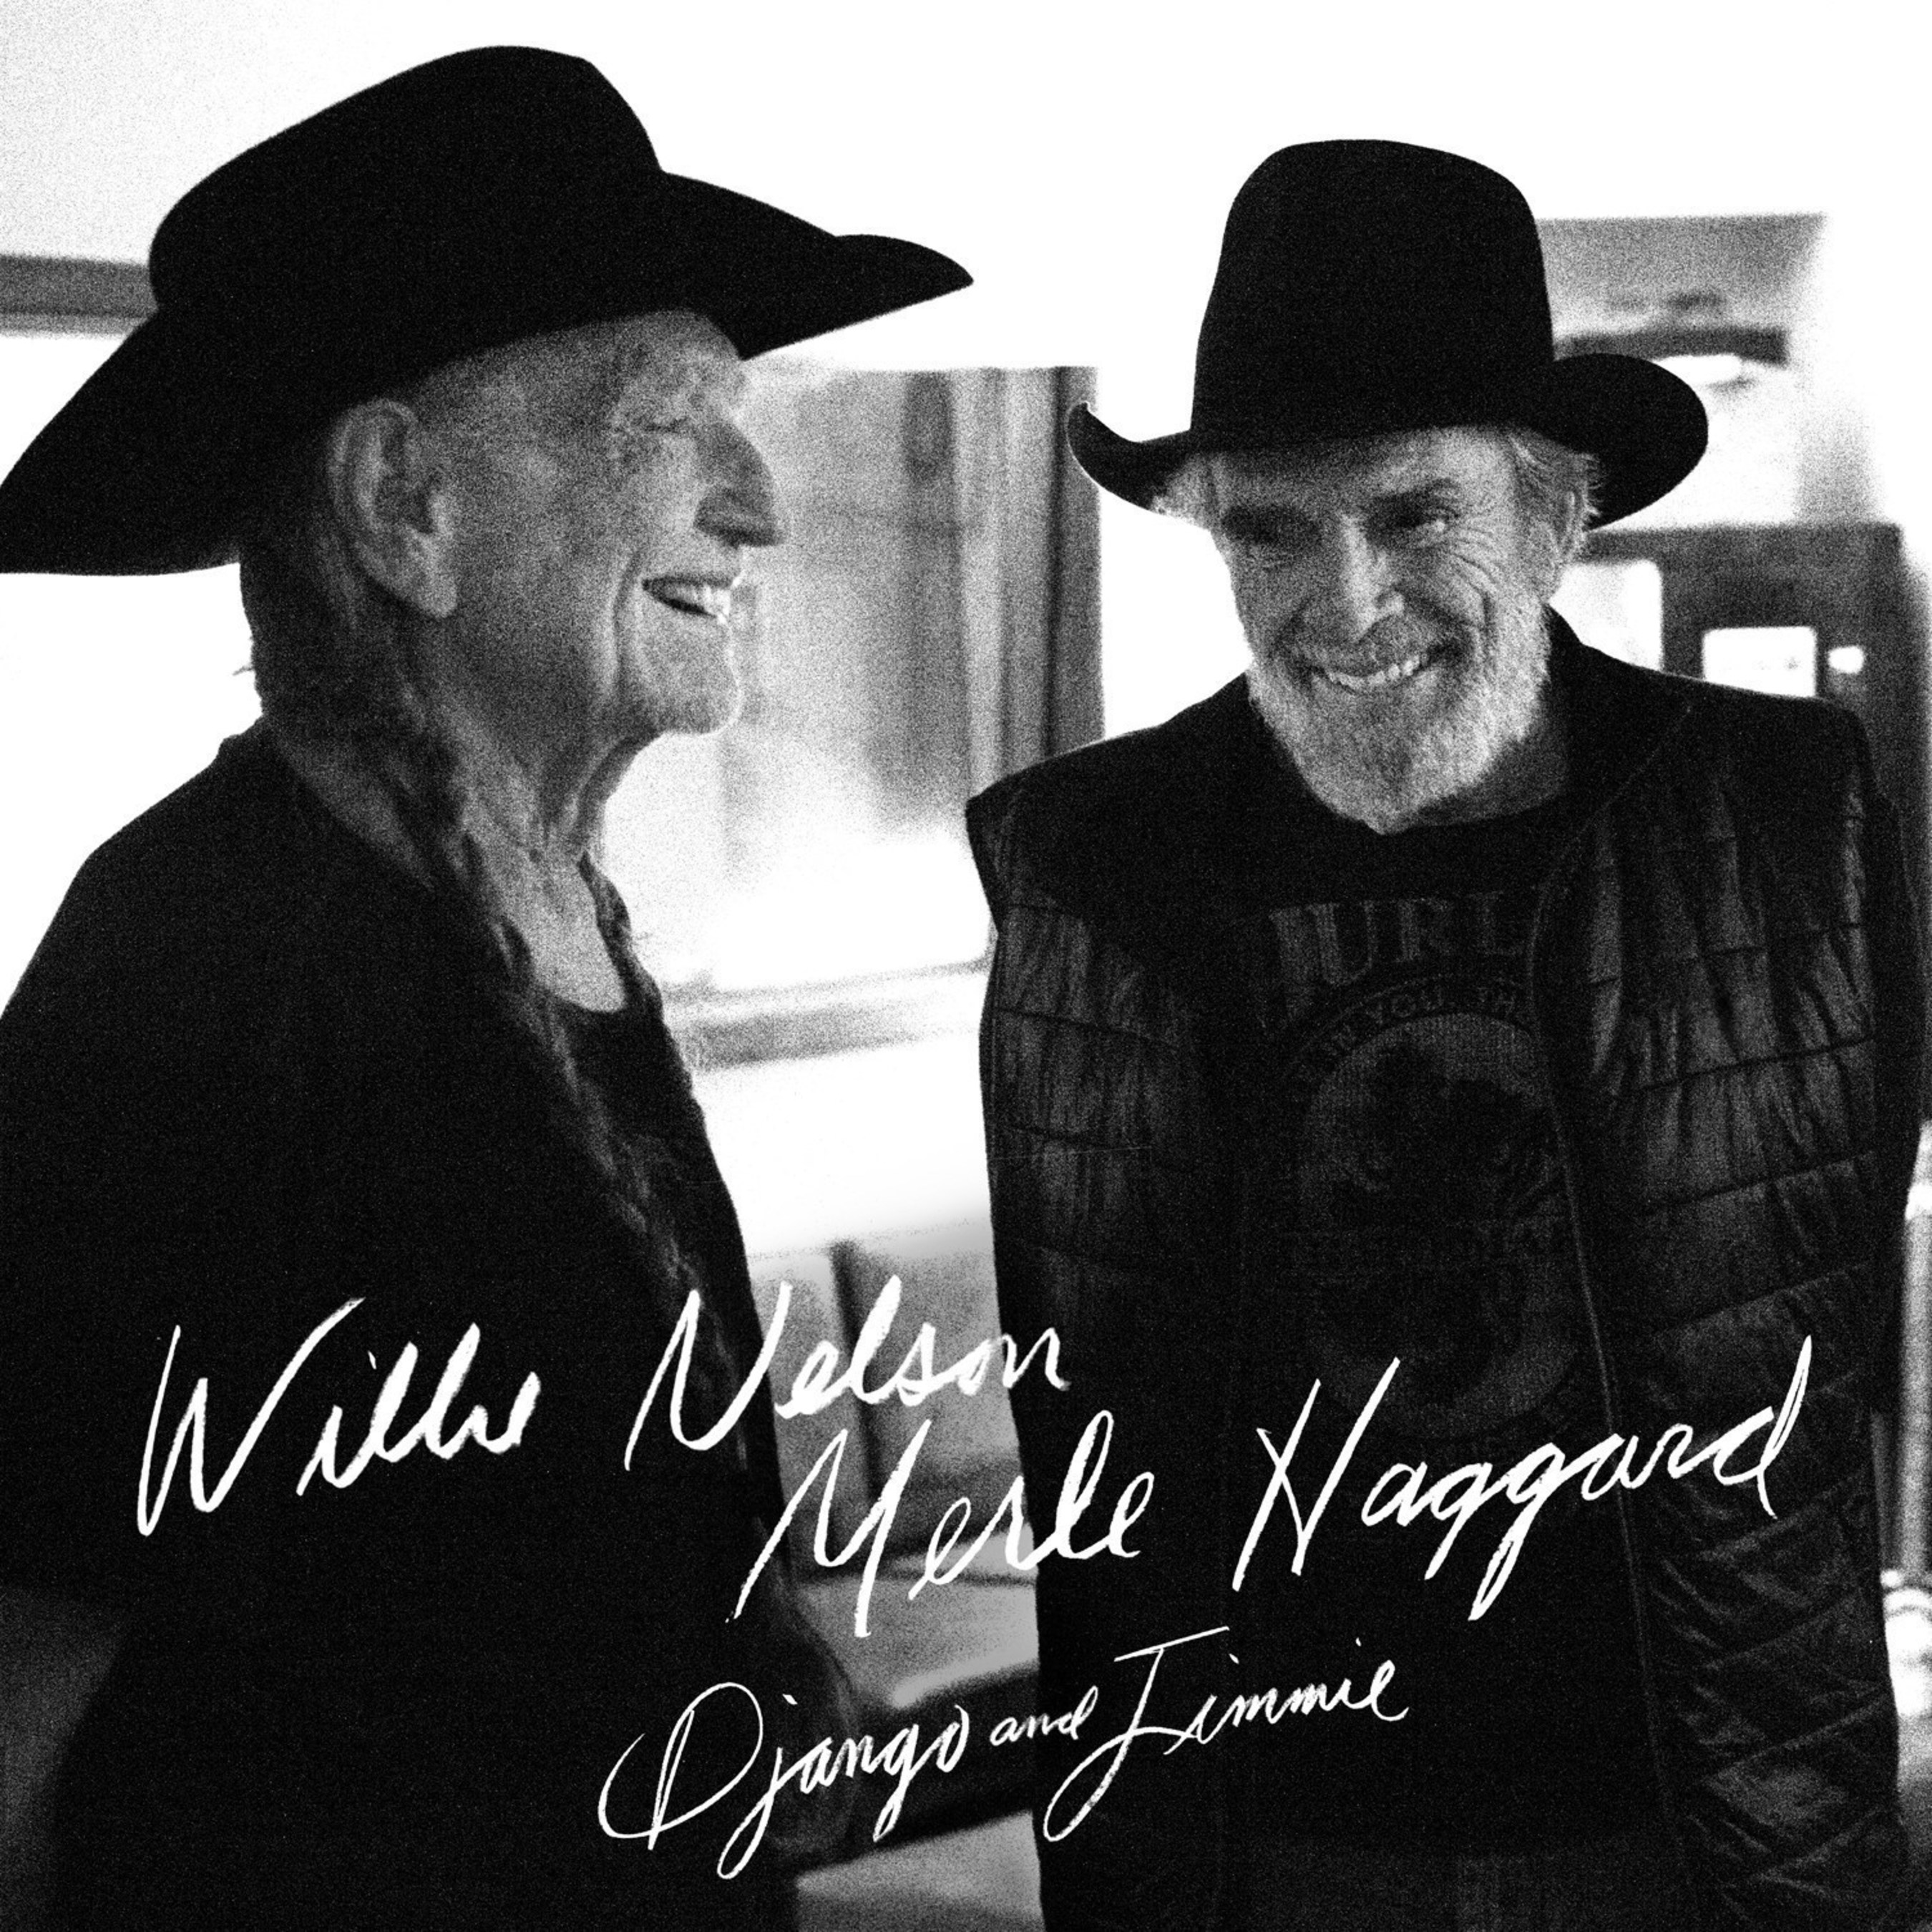 "Django and Jimmie", the new studio album collaboration from Willie Nelson and Merle Haggard, two of the founding fathers of American outlaw country music, debuts at #1 on the country charts!